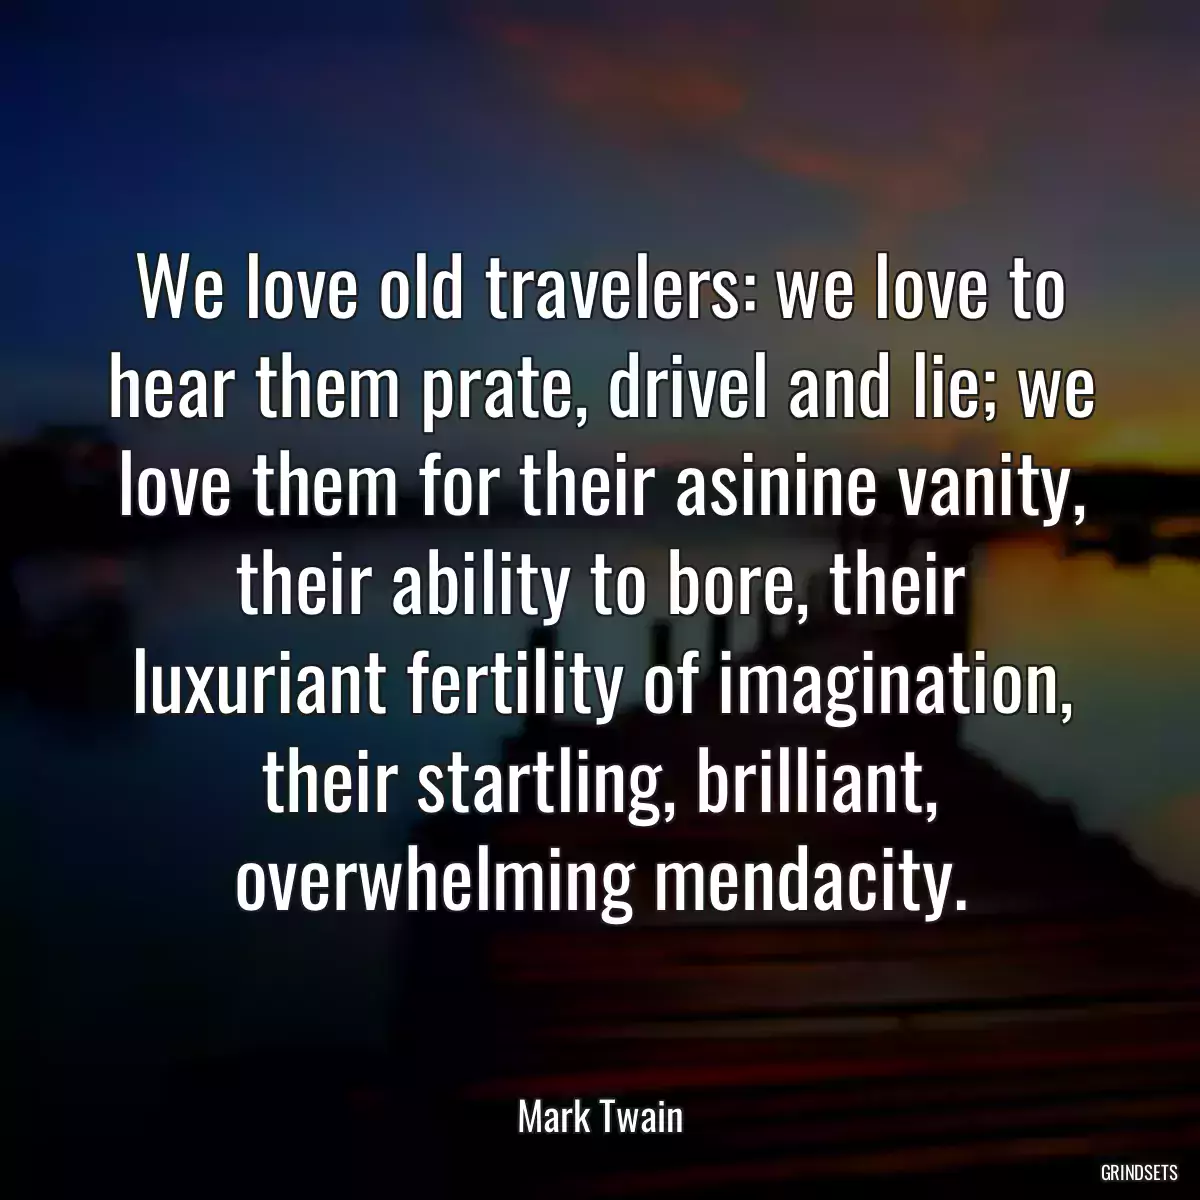 We love old travelers: we love to hear them prate, drivel and lie; we love them for their asinine vanity, their ability to bore, their luxuriant fertility of imagination, their startling, brilliant, overwhelming mendacity.